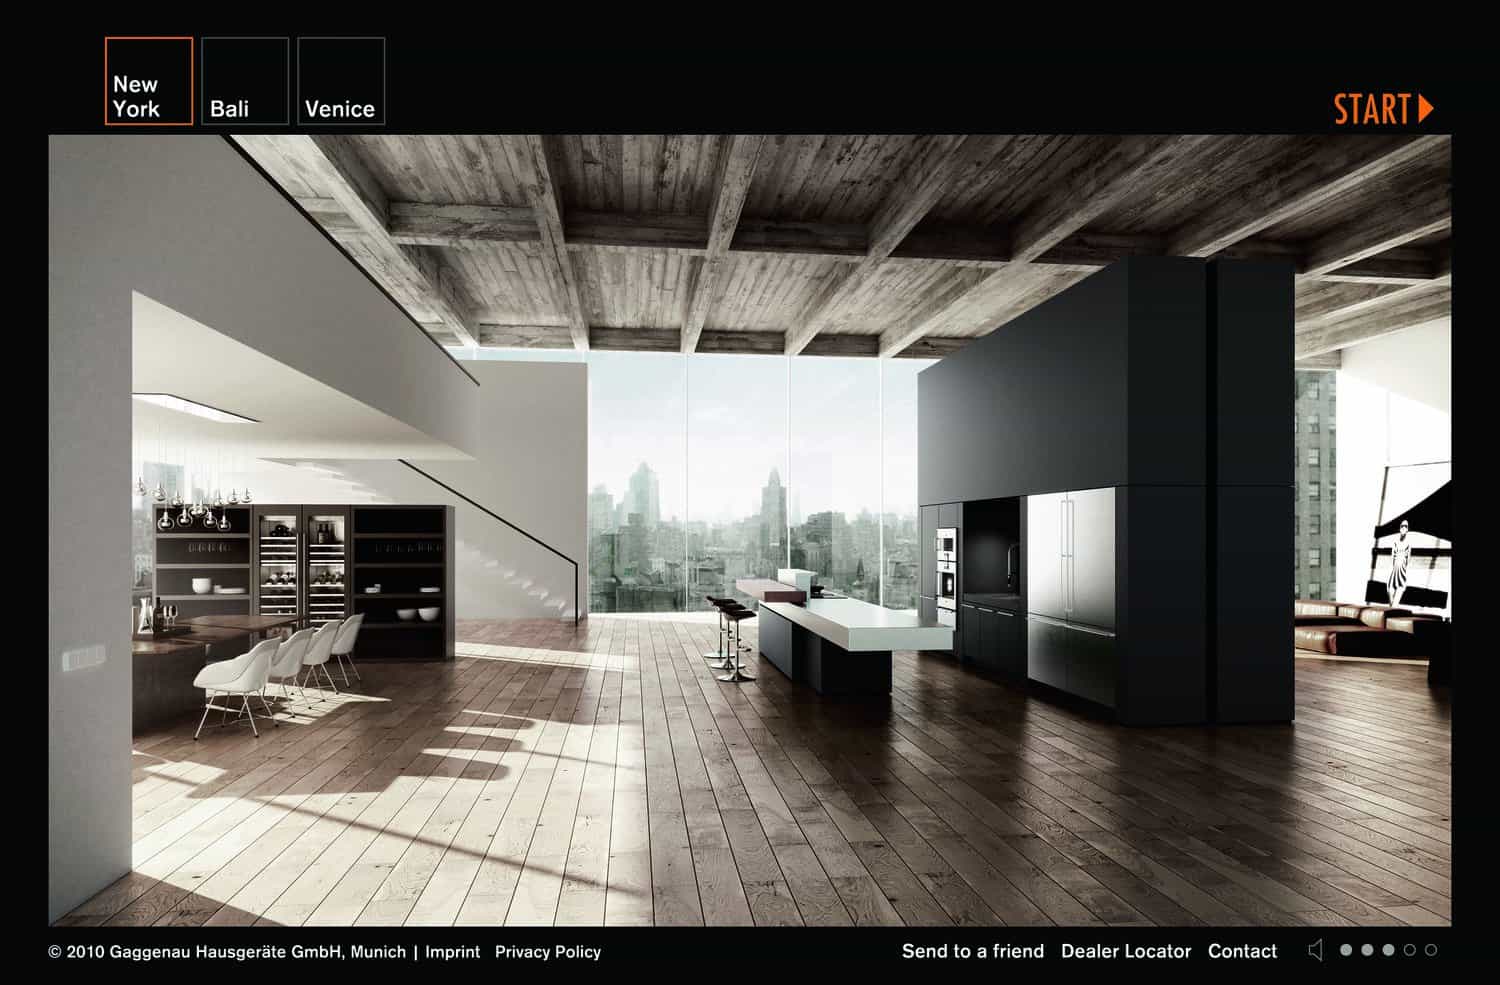 The Gaggenau 3D online showroom displays a modern kitchen with a view on New York, which creates a rich sensory online brand experience.